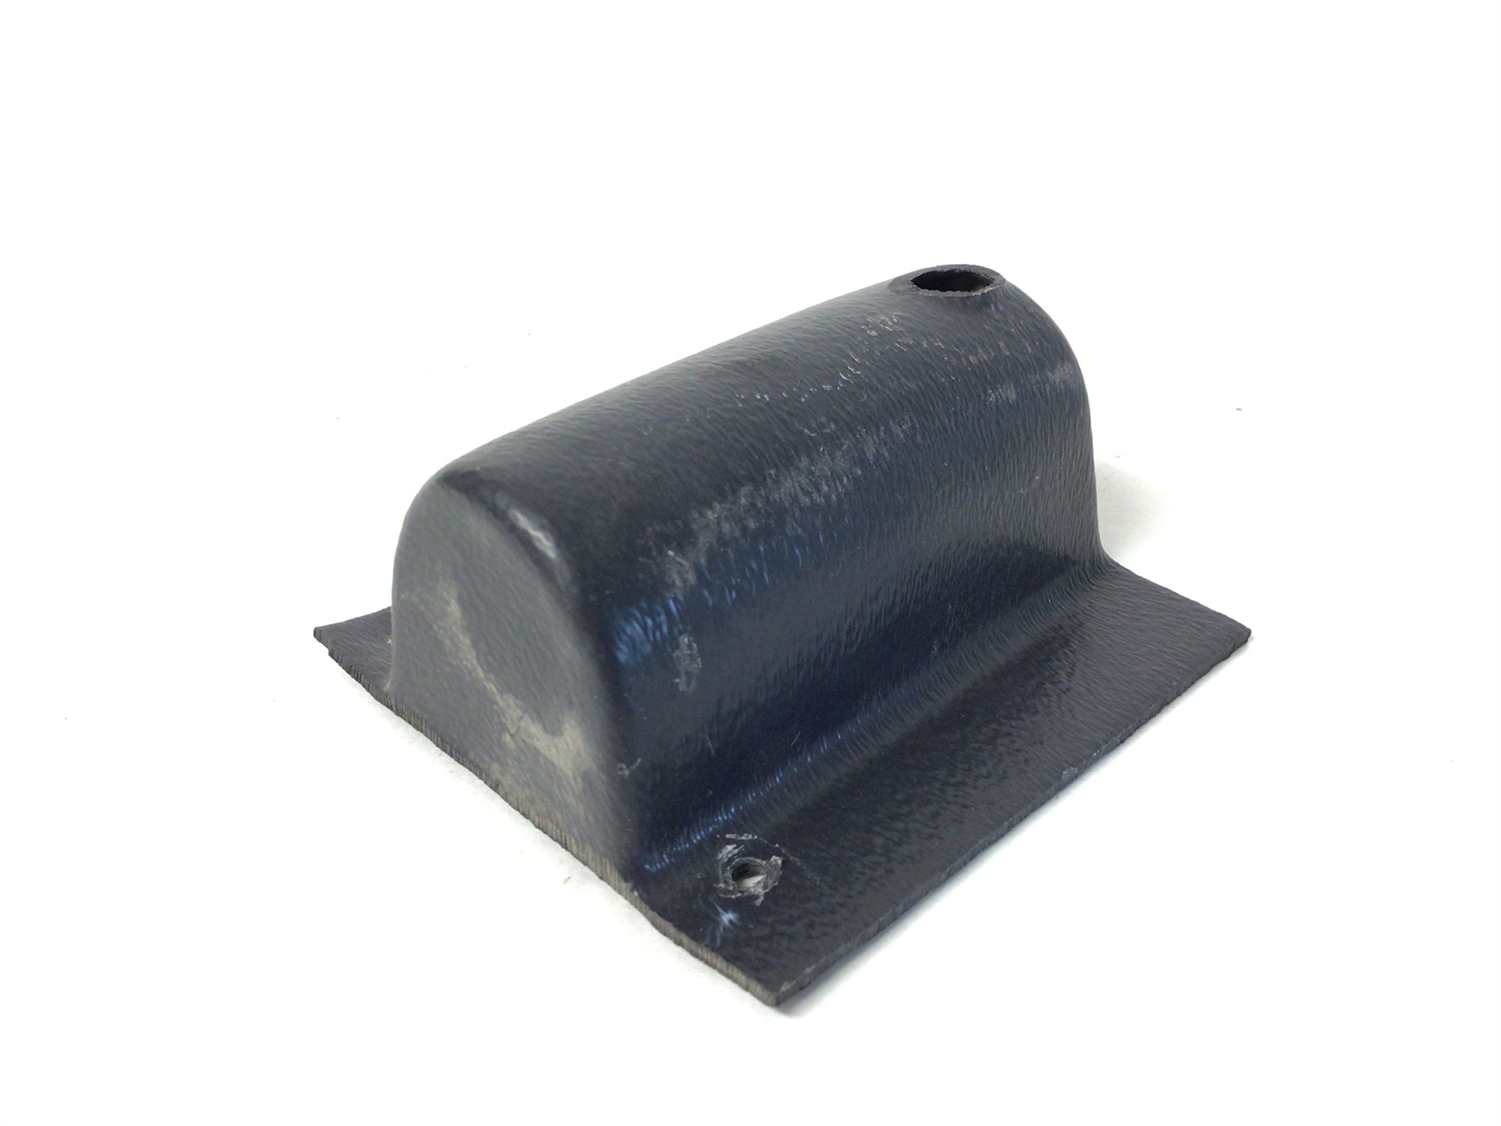 Lift Motor Capacitor Cover (Used)